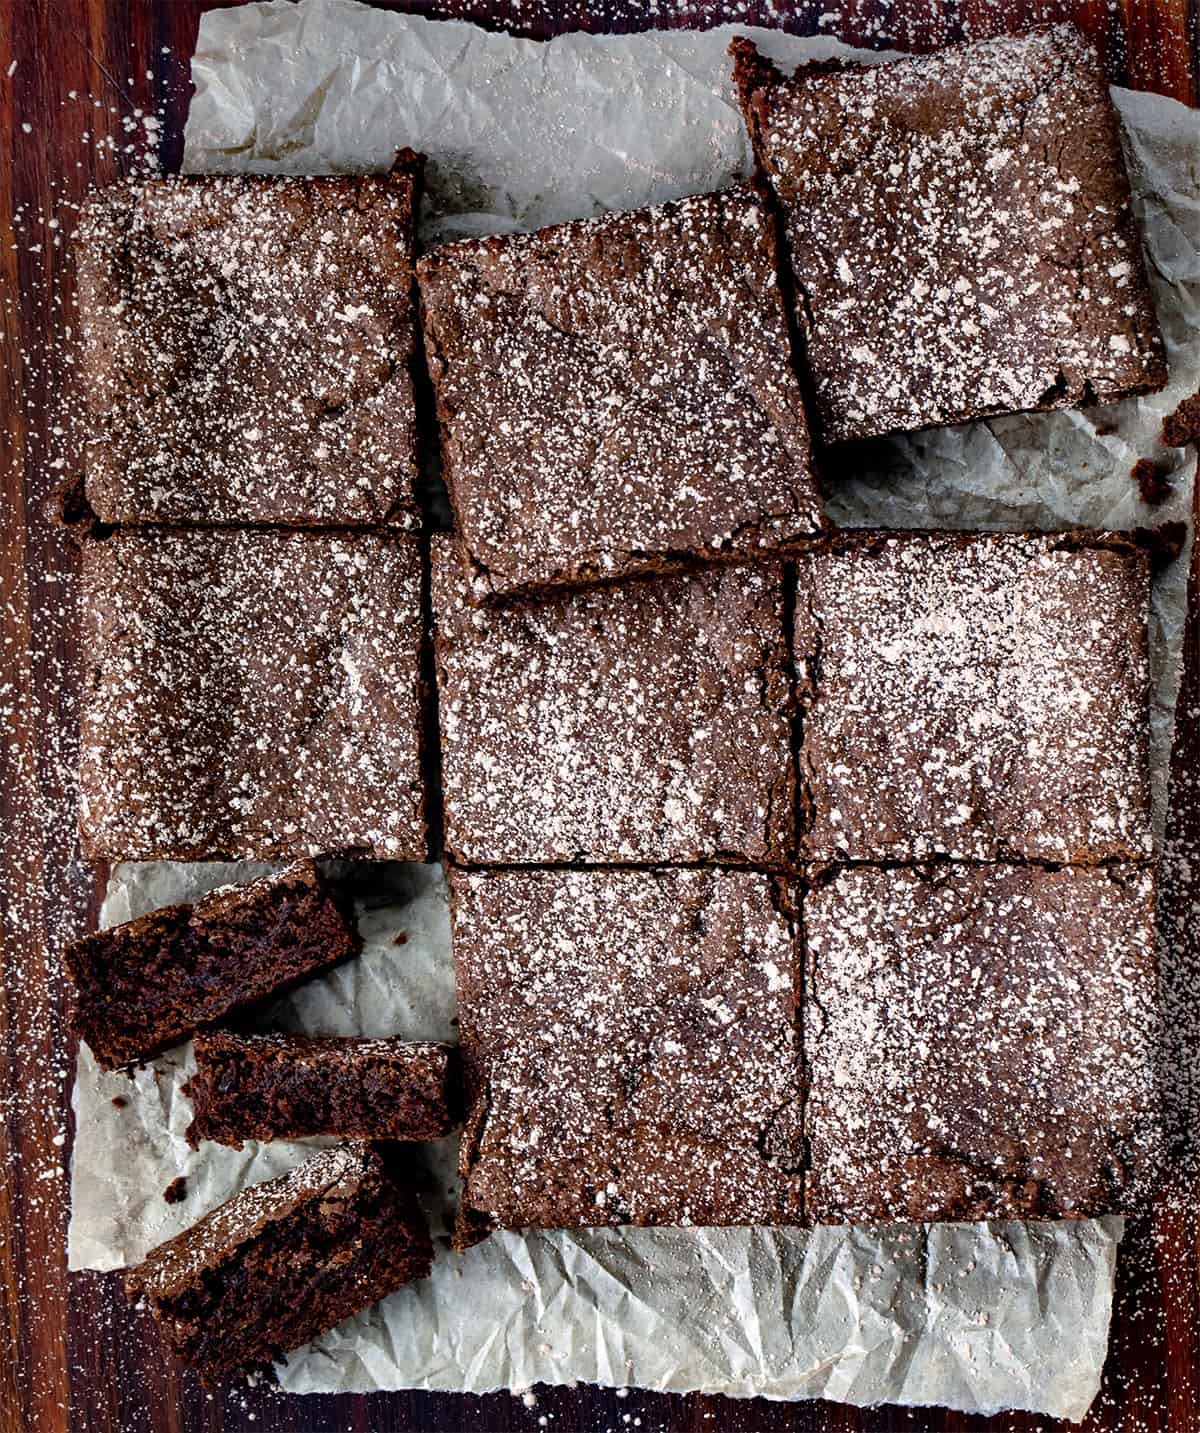 Chocolate Brownies Cut into Squares and One cut Into Pieces Showing Inside.